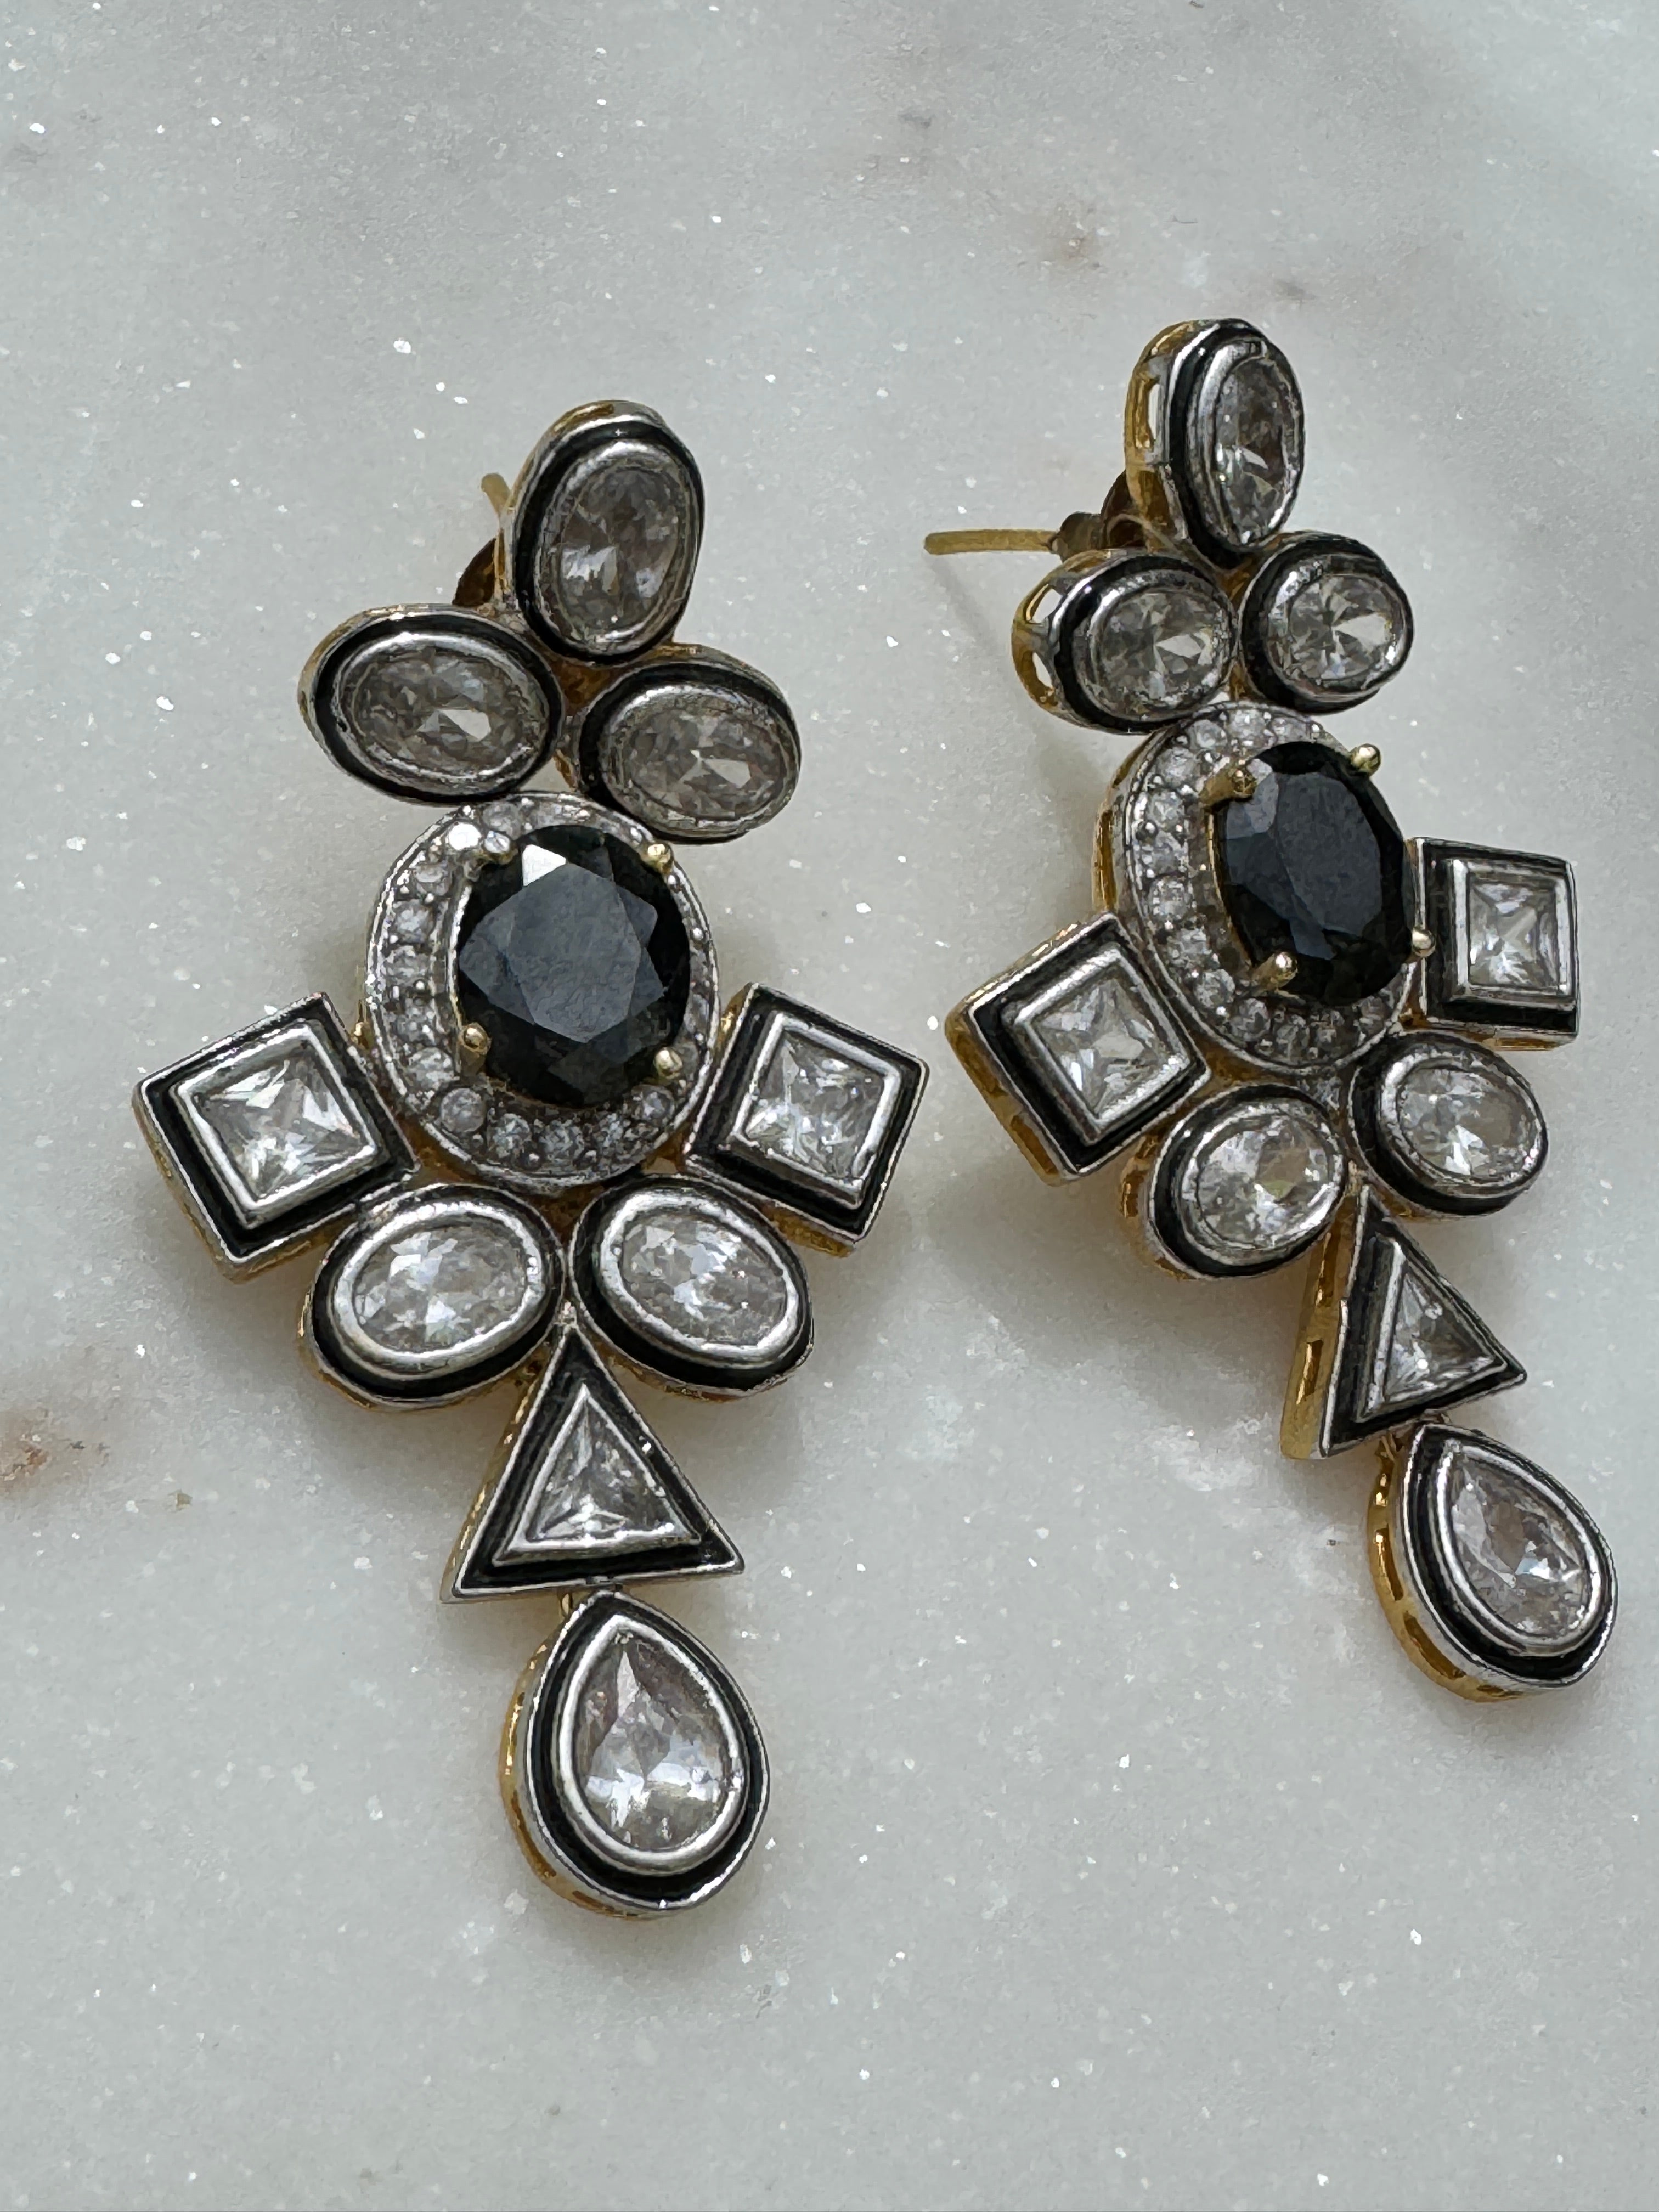 Future Nomads Earrings Black Spinel & Crystal Earrings Gold Plated